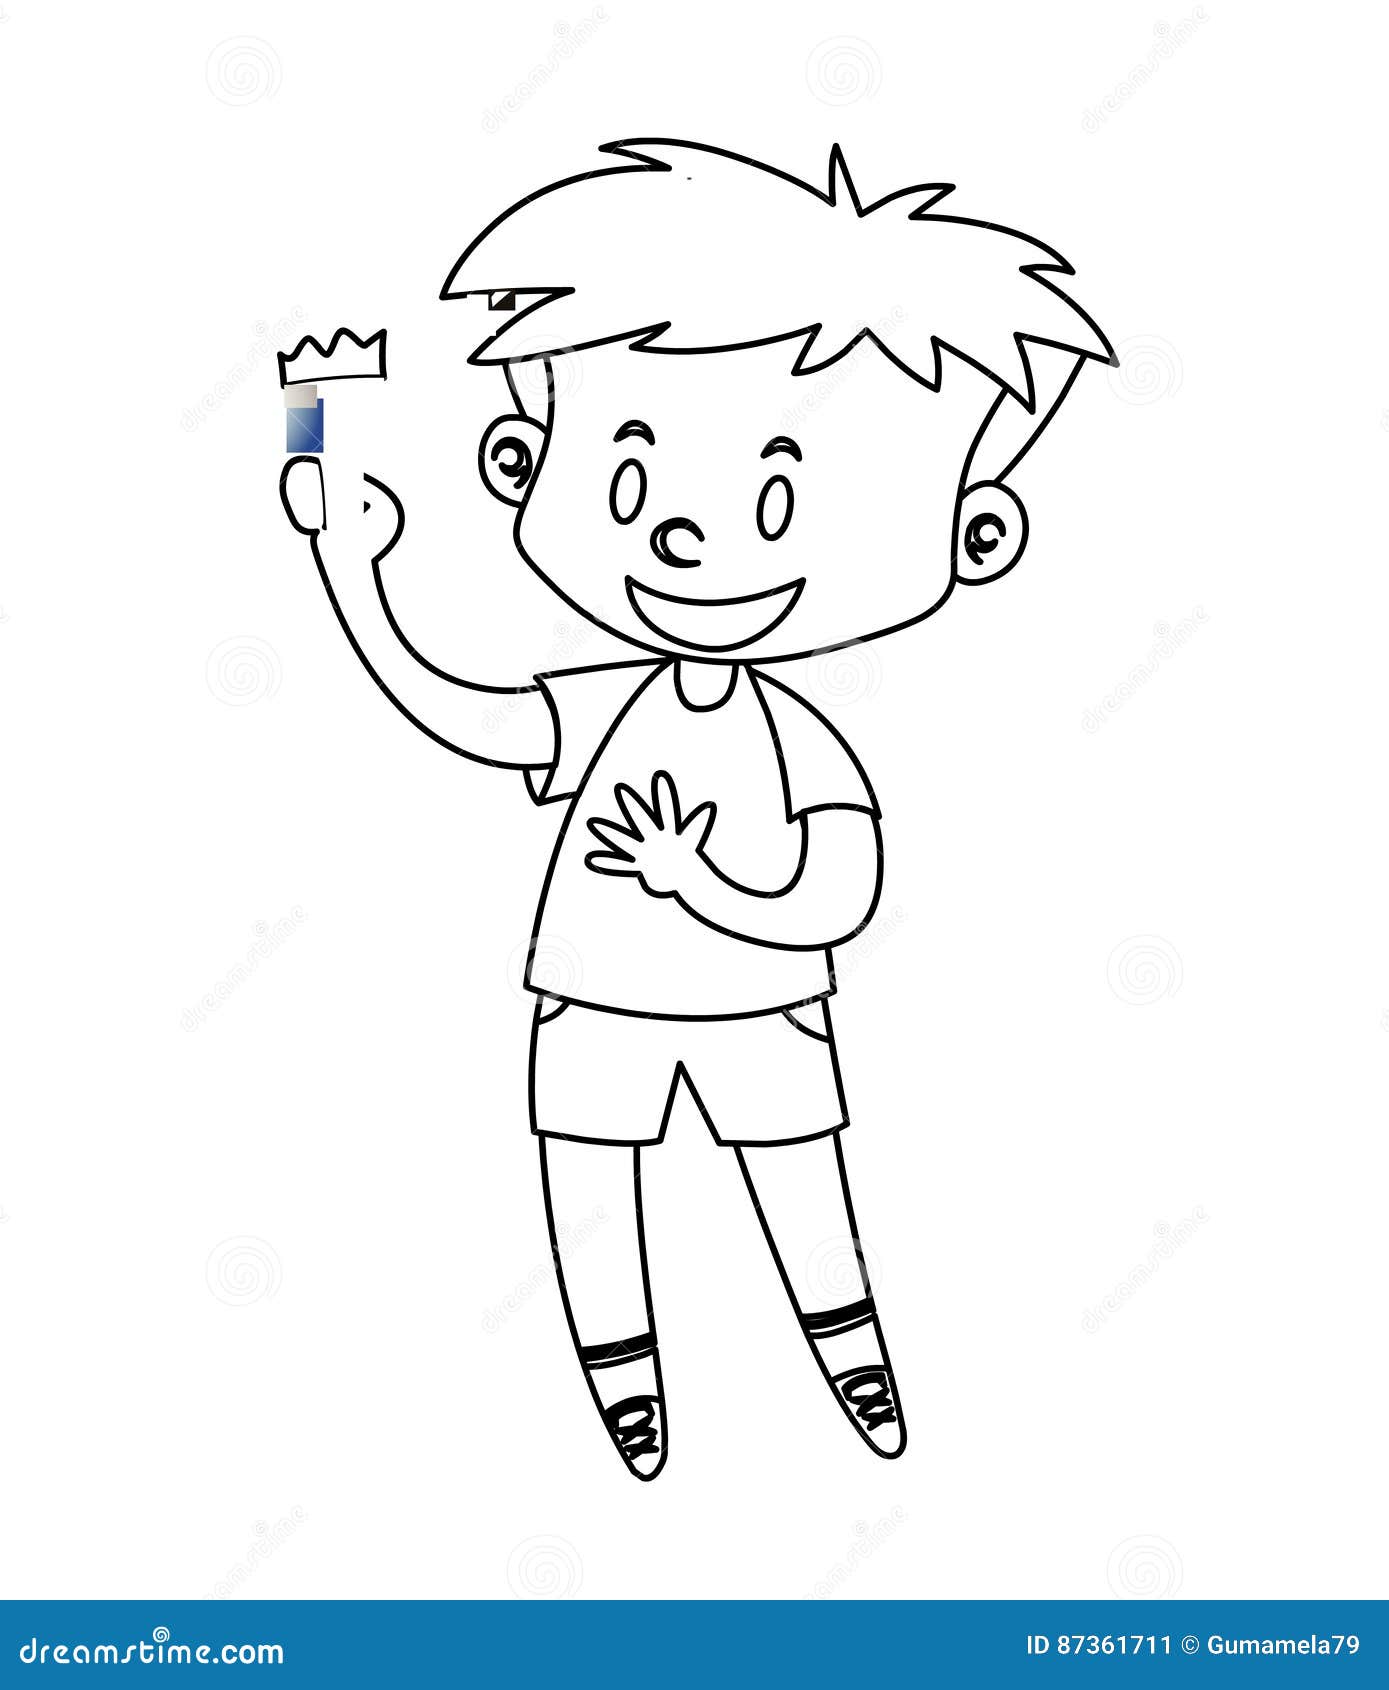 Little boy coloring page stock illustration. Illustration of ...